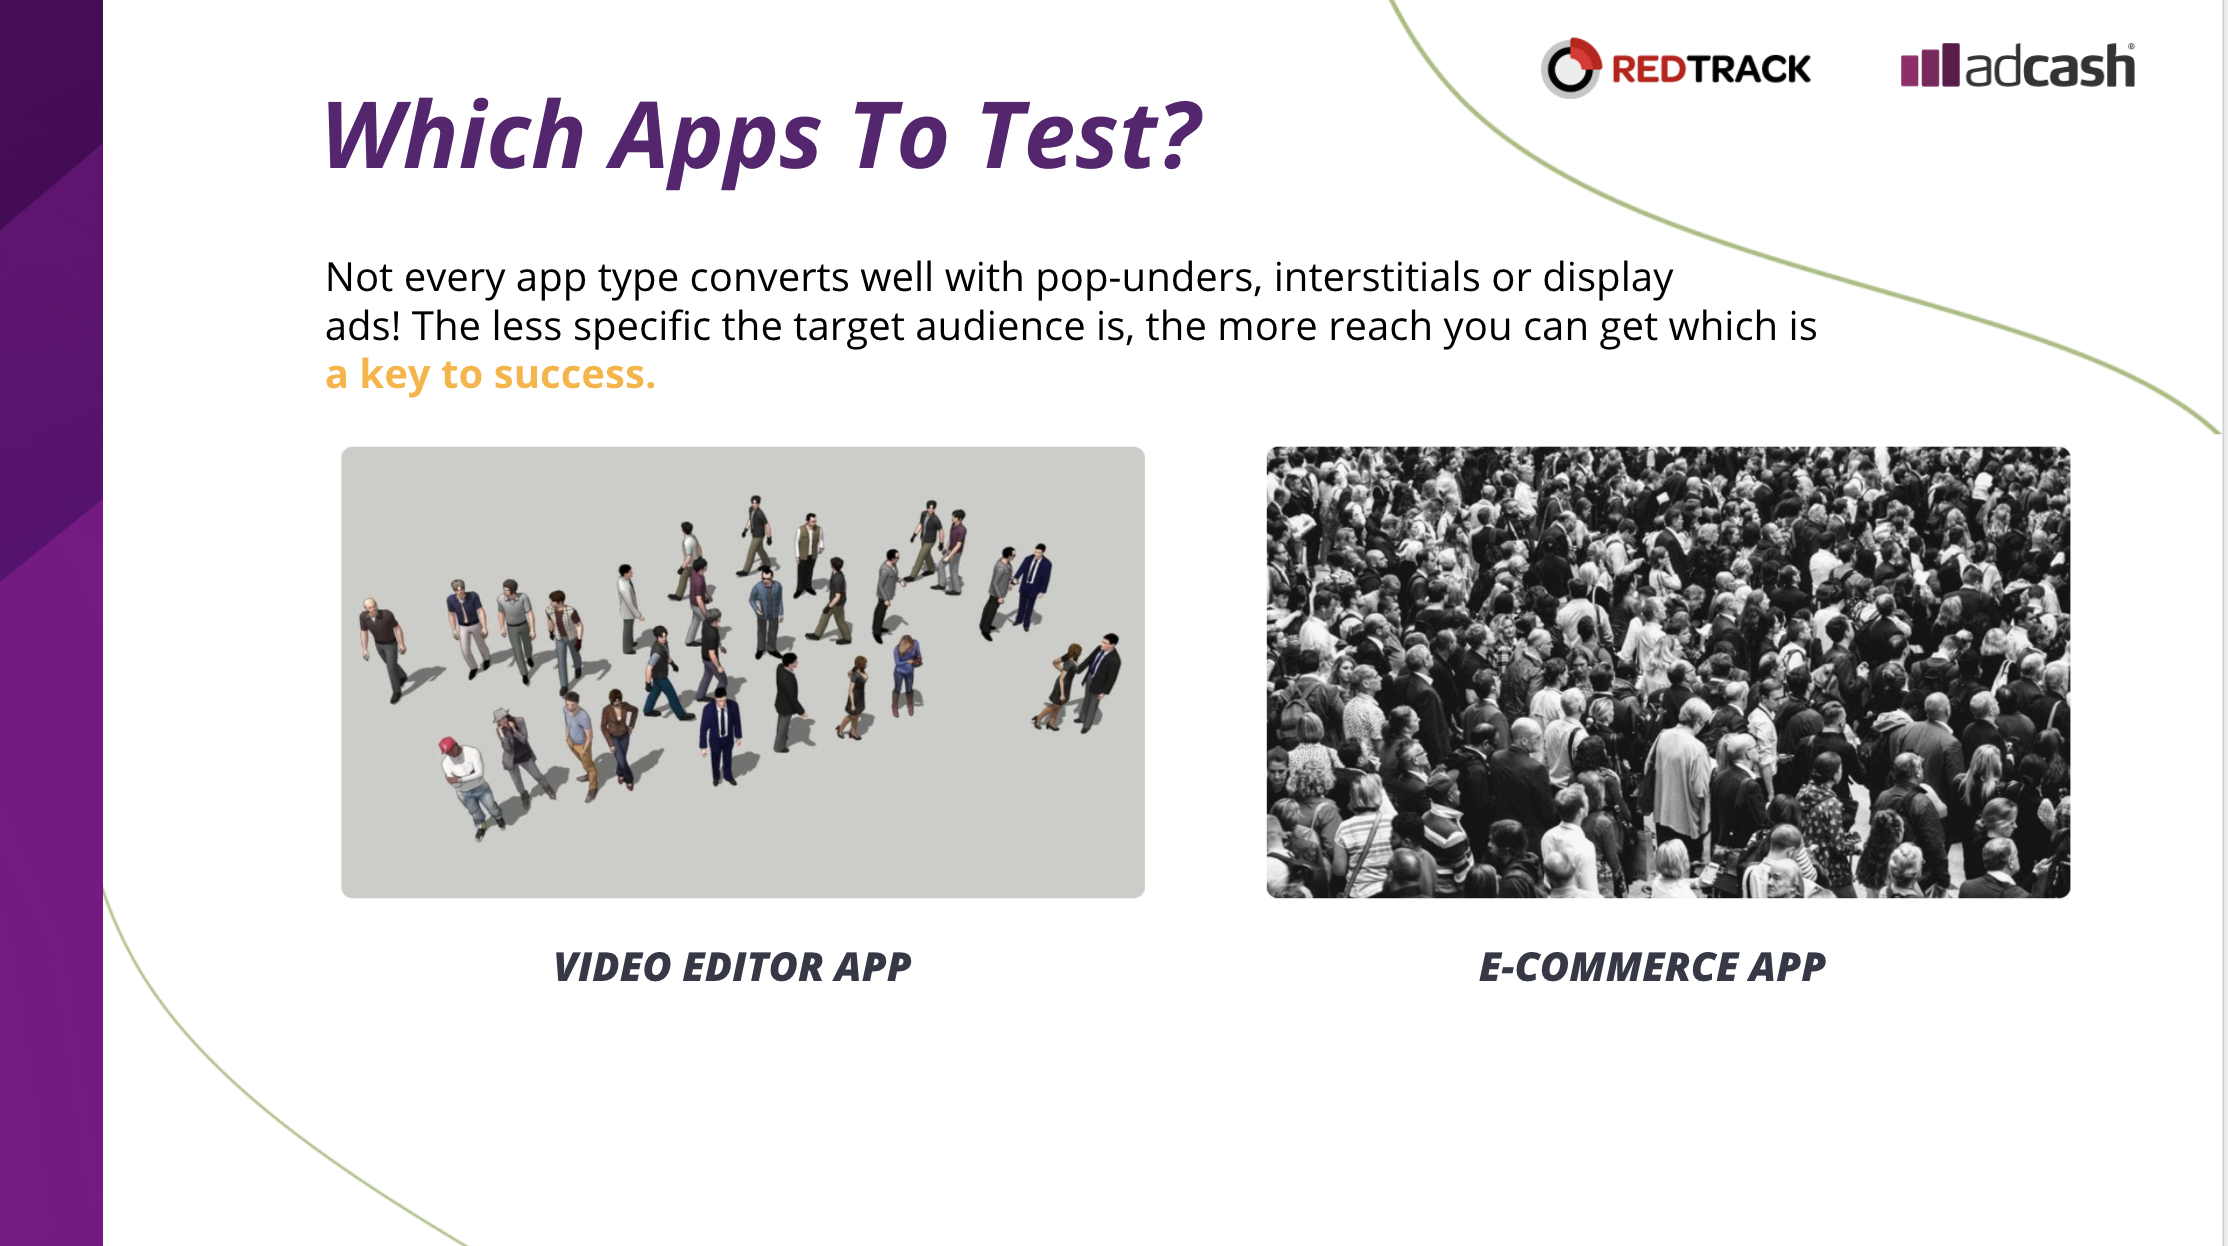 Adcash - Online Advertising - Apps to Test - 2021